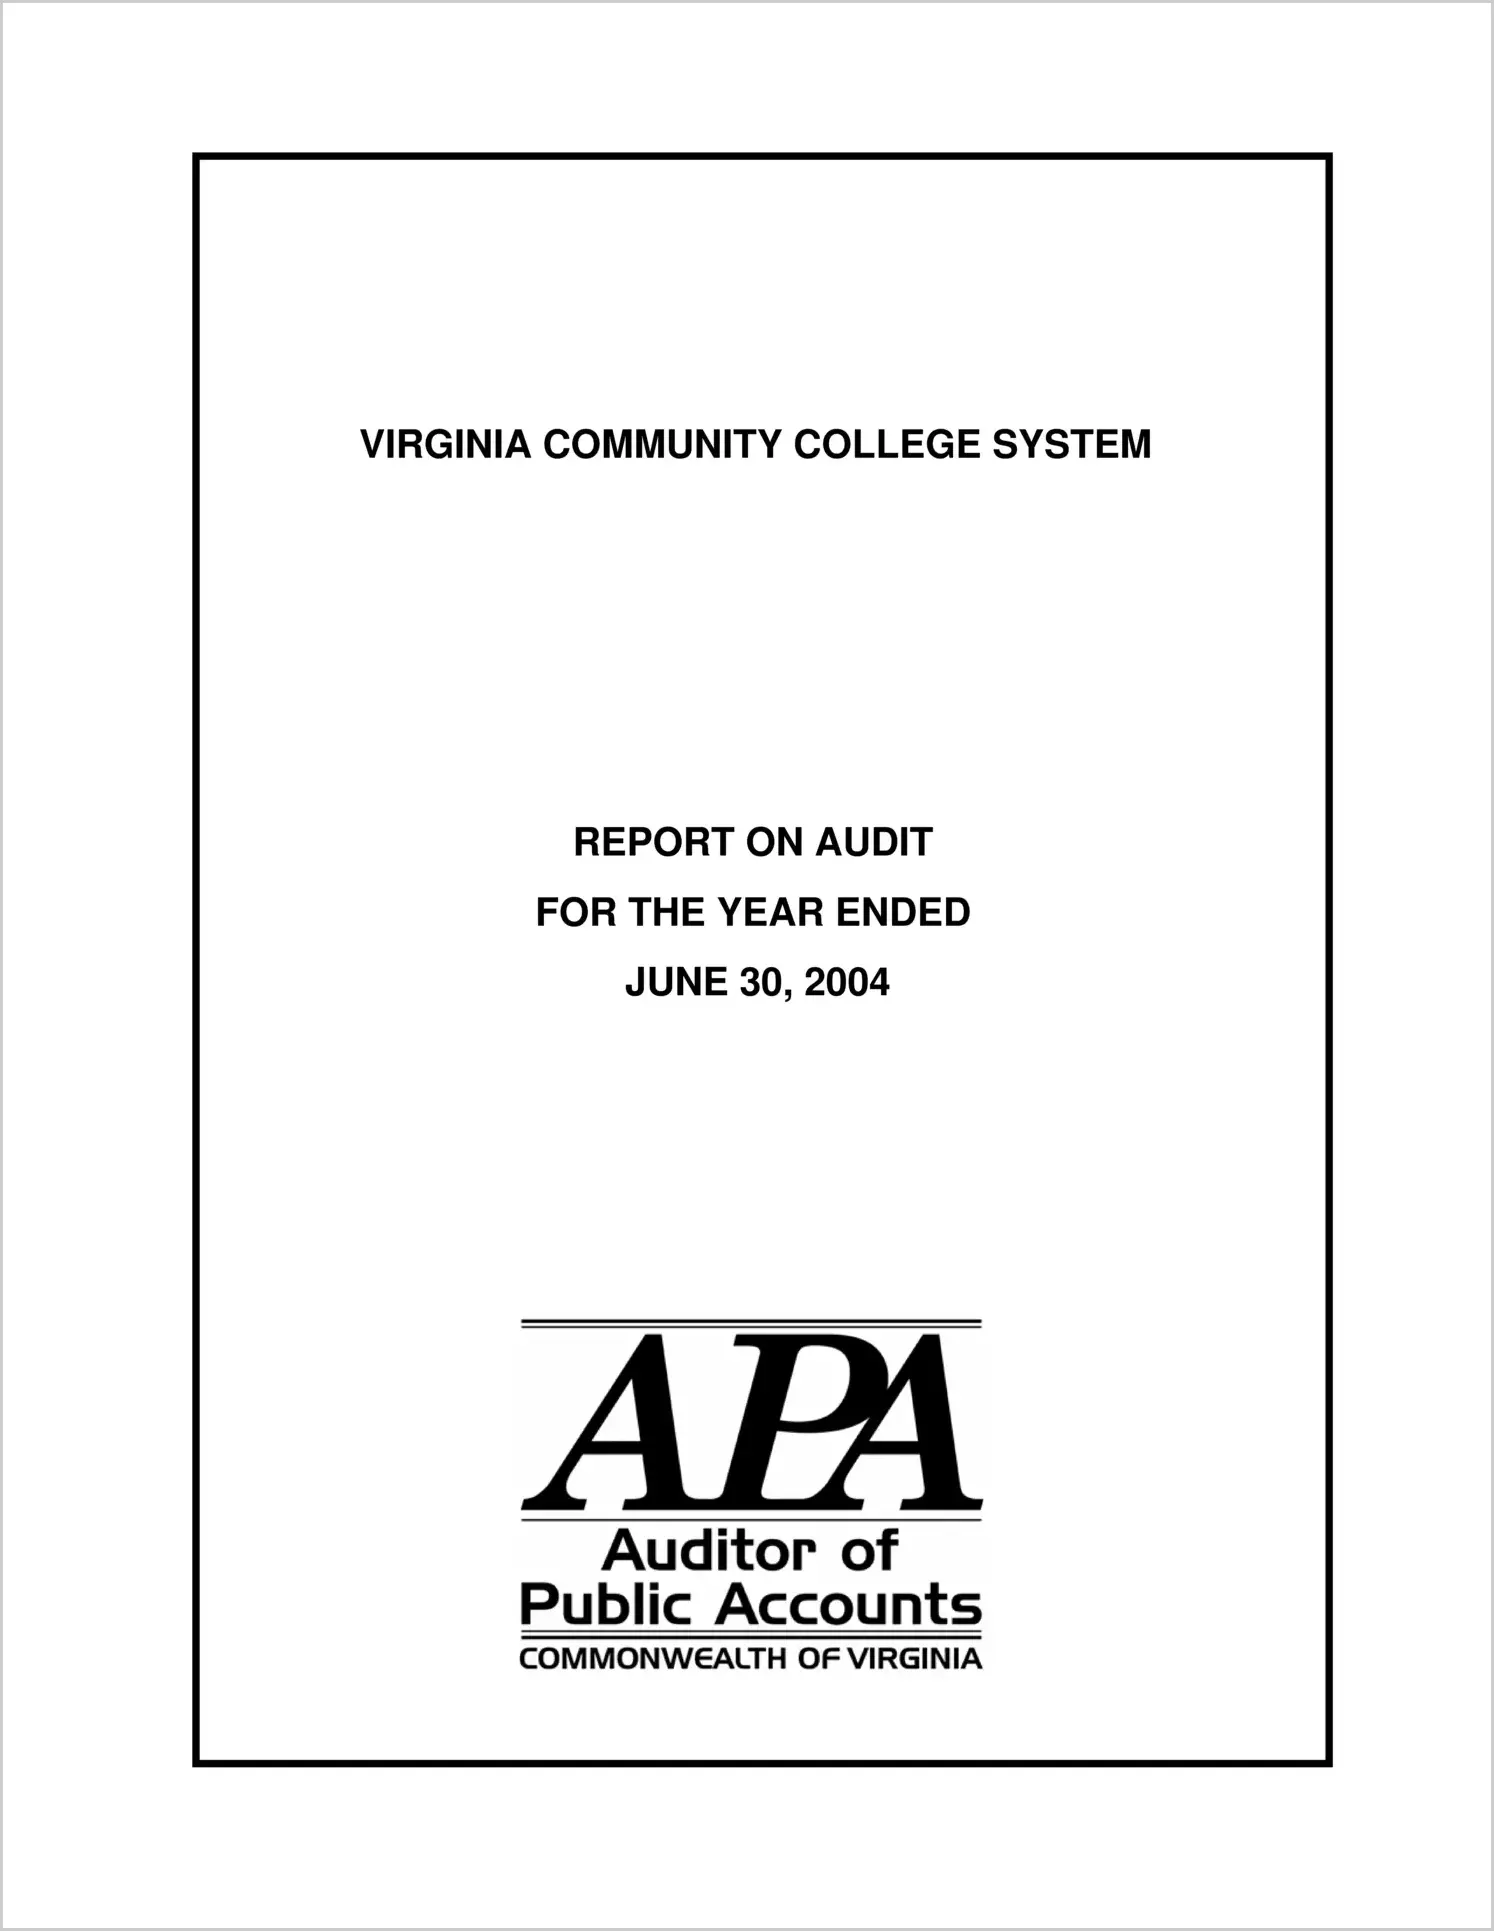 Virginia Community College System for the year ended June 30, 2004